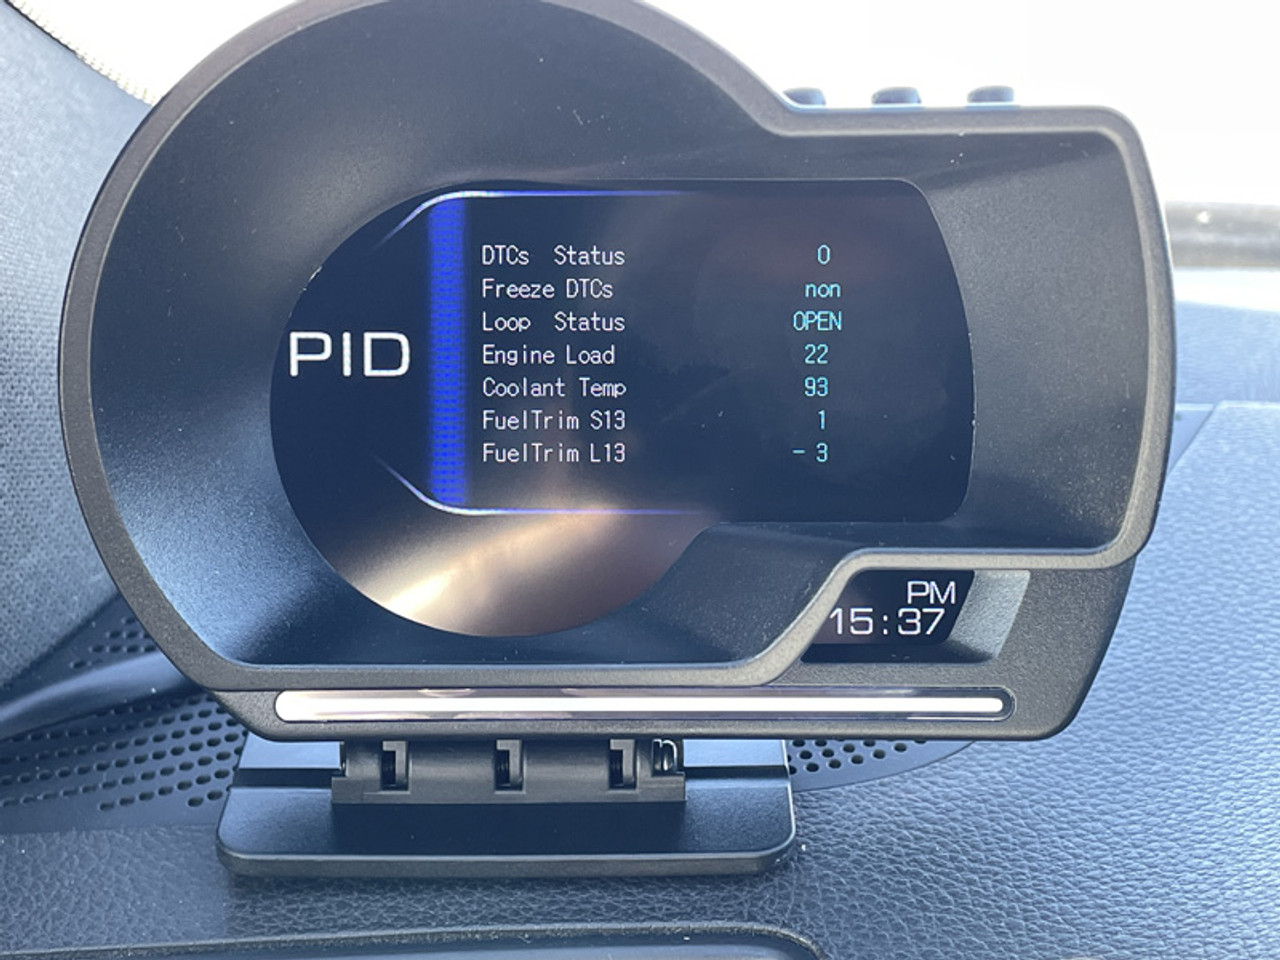 Head-up Display (HUD) from AGC Automotive 